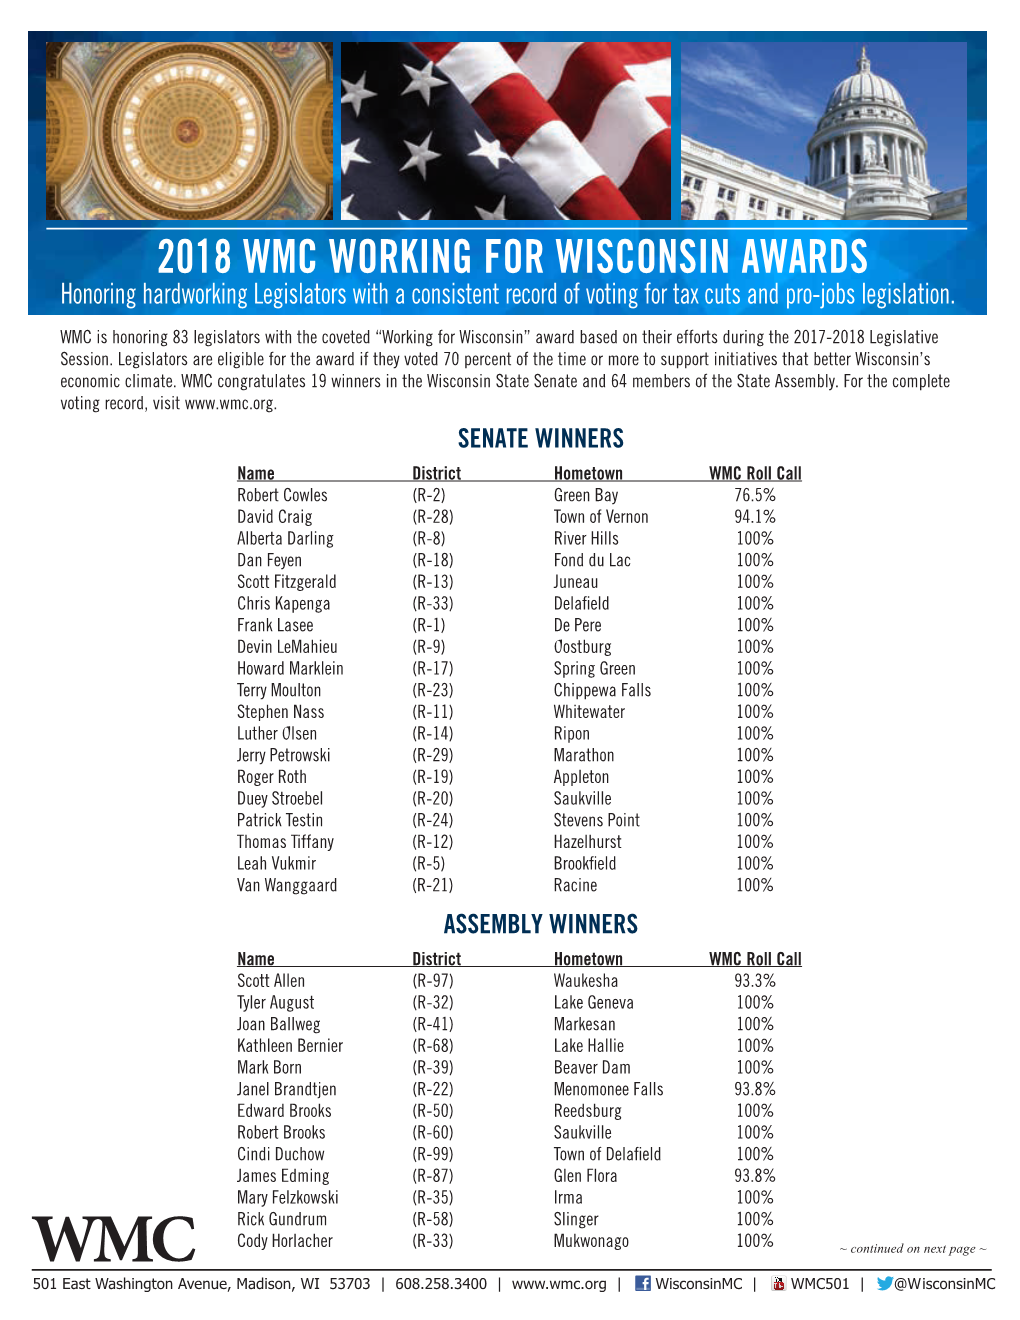 2018 WMC WORKING for WISCONSIN AWARDS Honoring Hardworking Legislators with a Consistent Record of Voting for Tax Cuts and Pro-Jobs Legislation